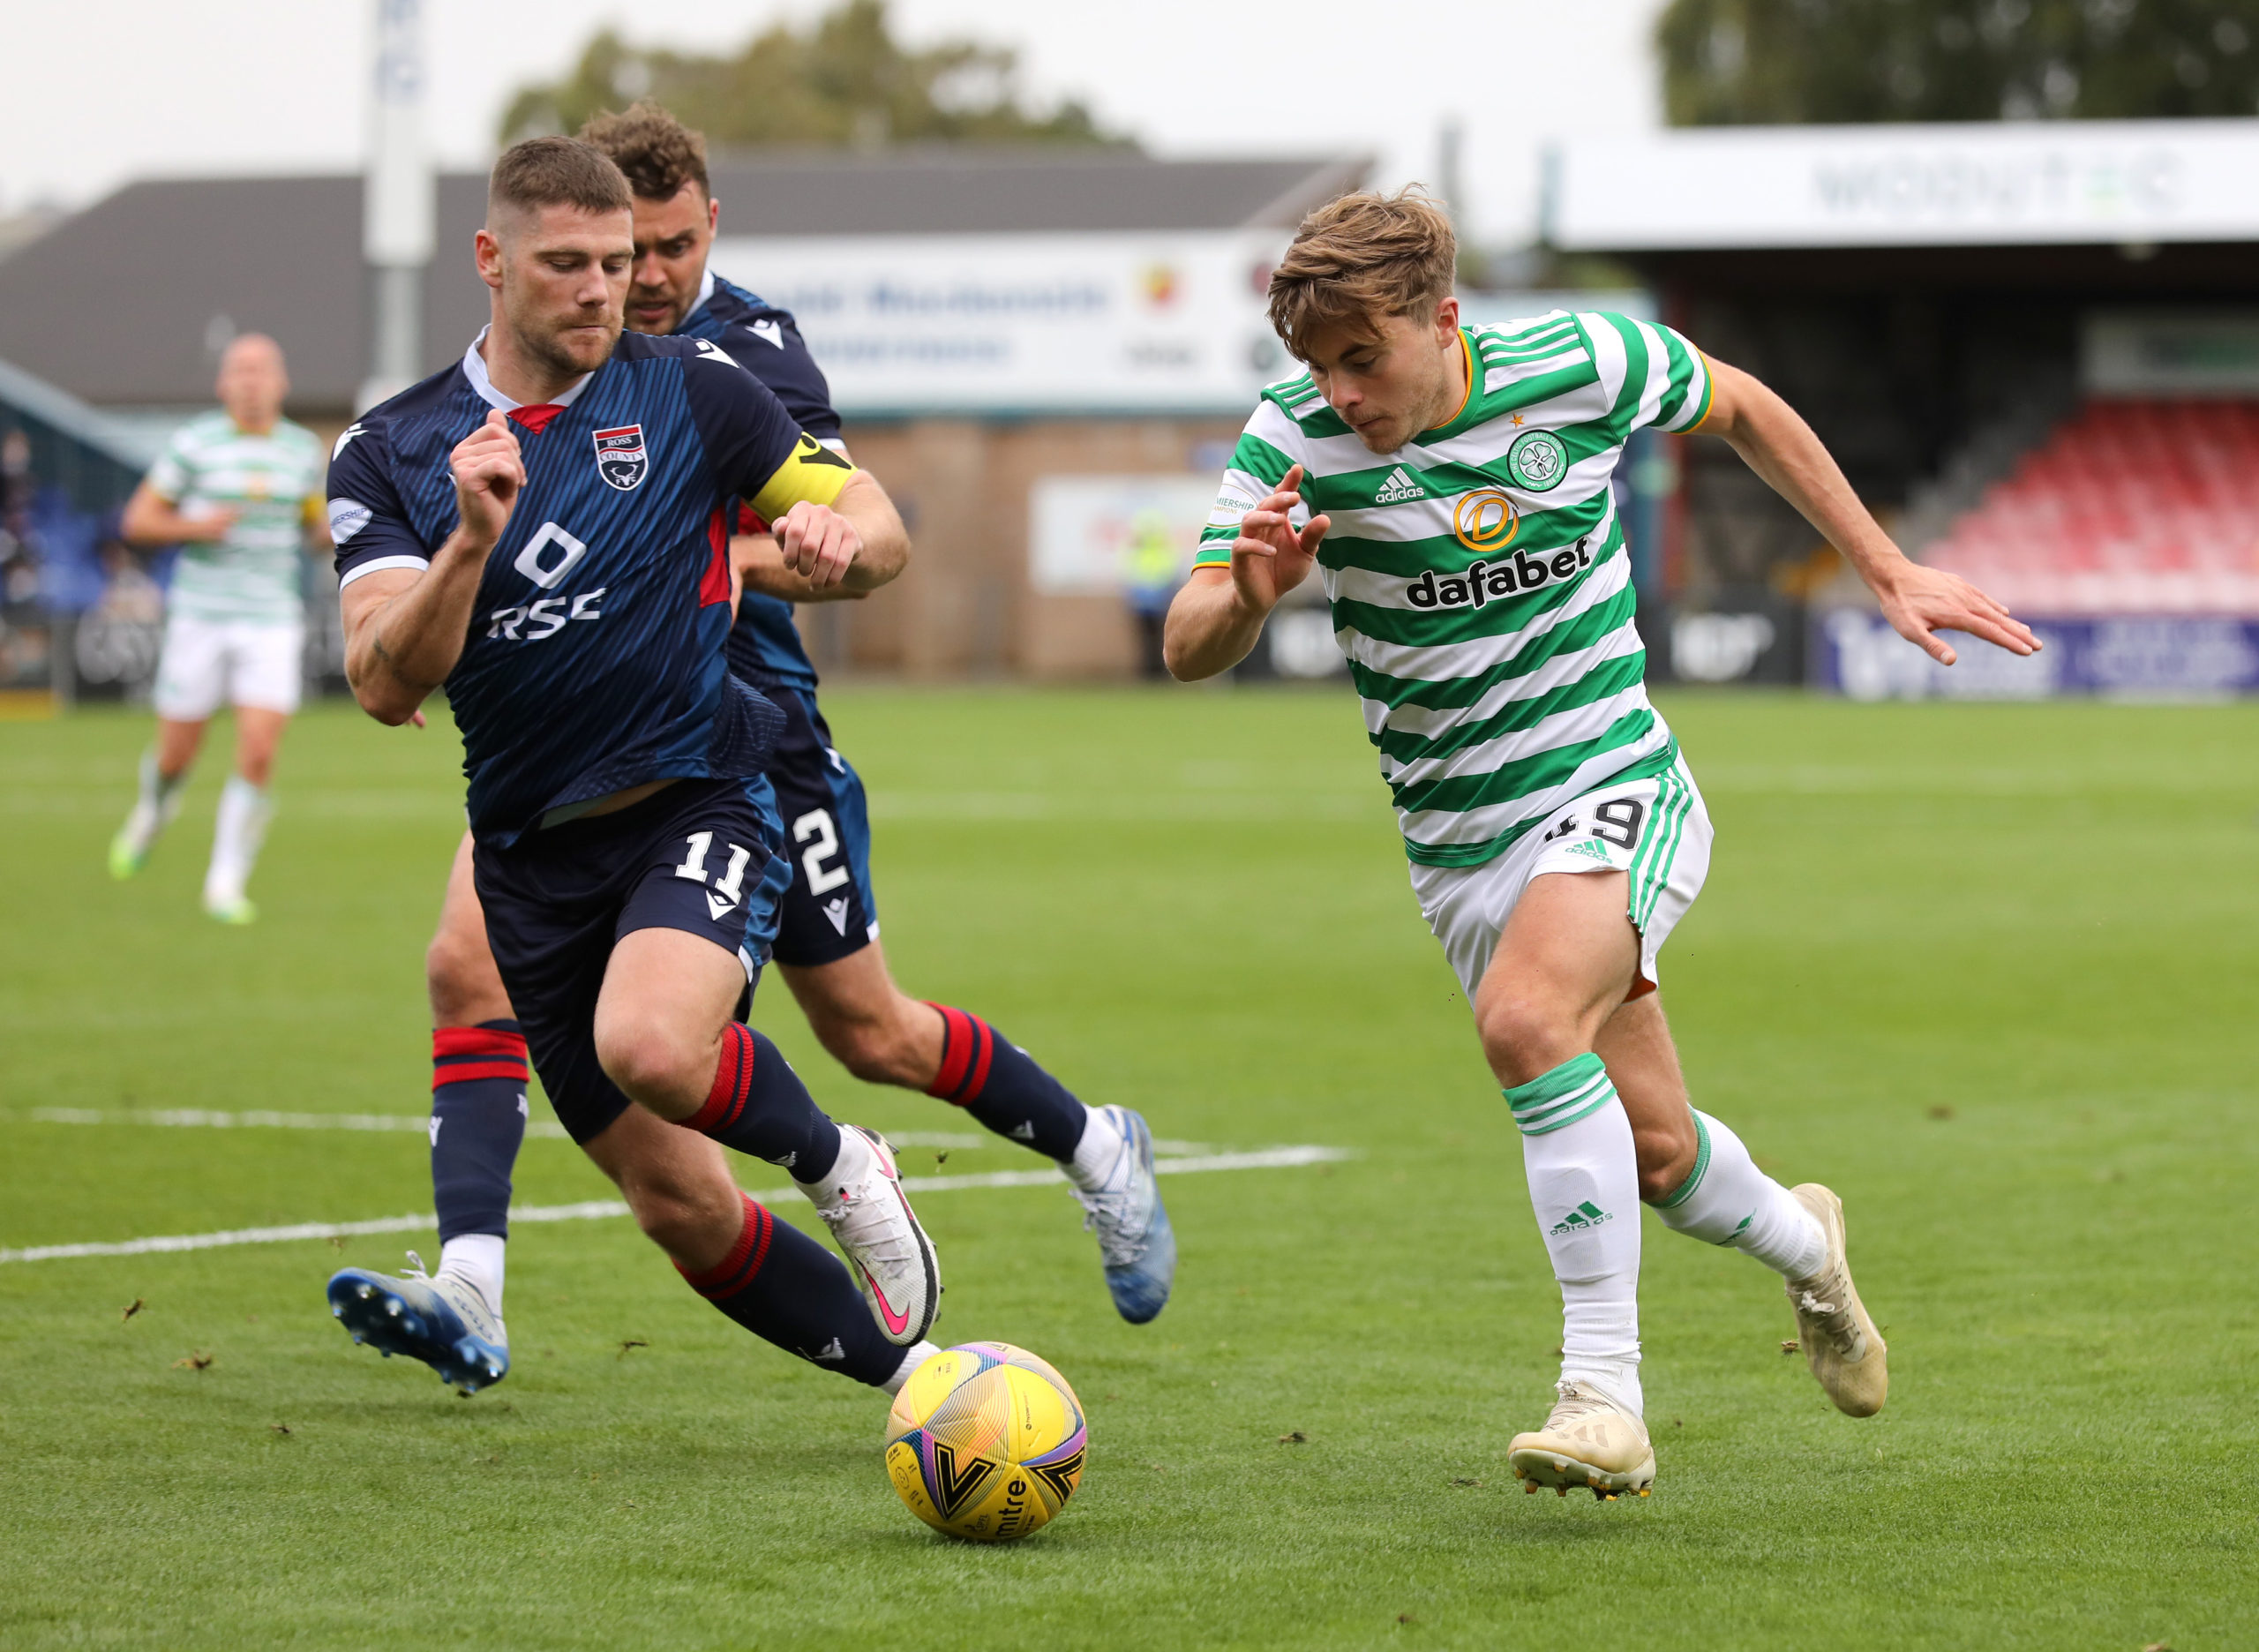 Celtic are badly missing James Forrest; his absence has revealed his true value